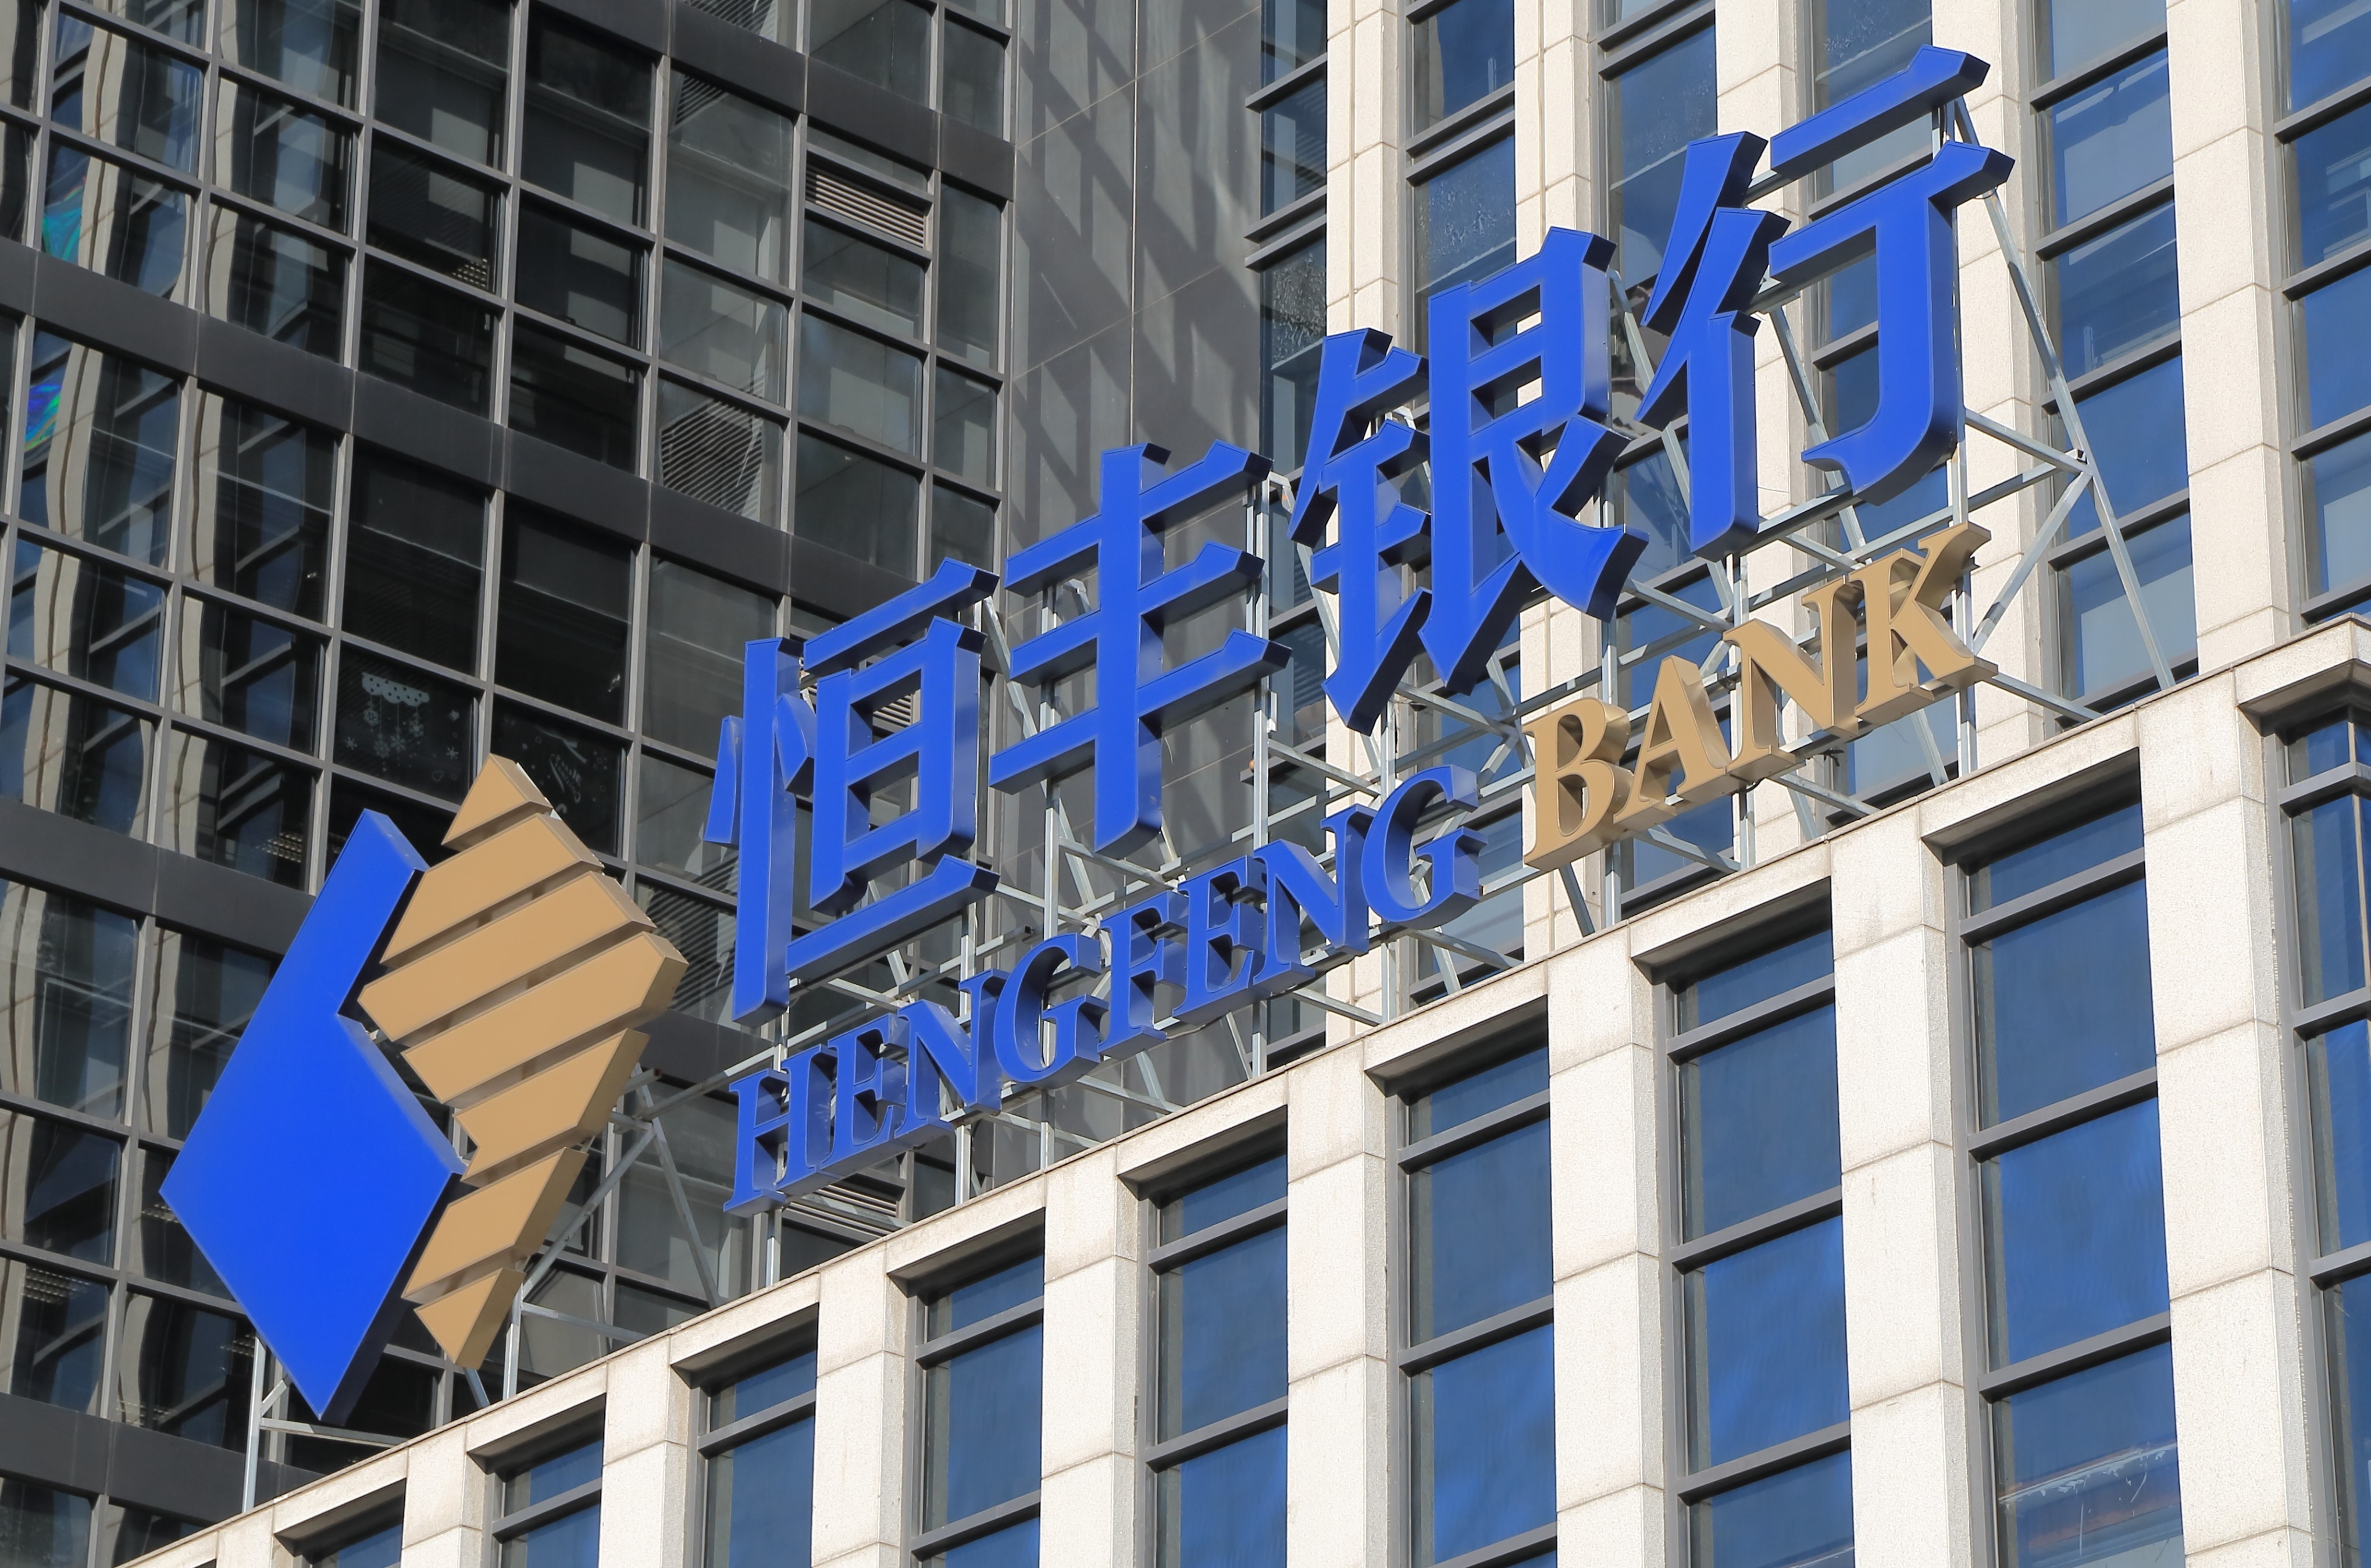 Heng Feng Bank’s signage, based in Yantai city in Shandong province. Photo: Shutterstock Images